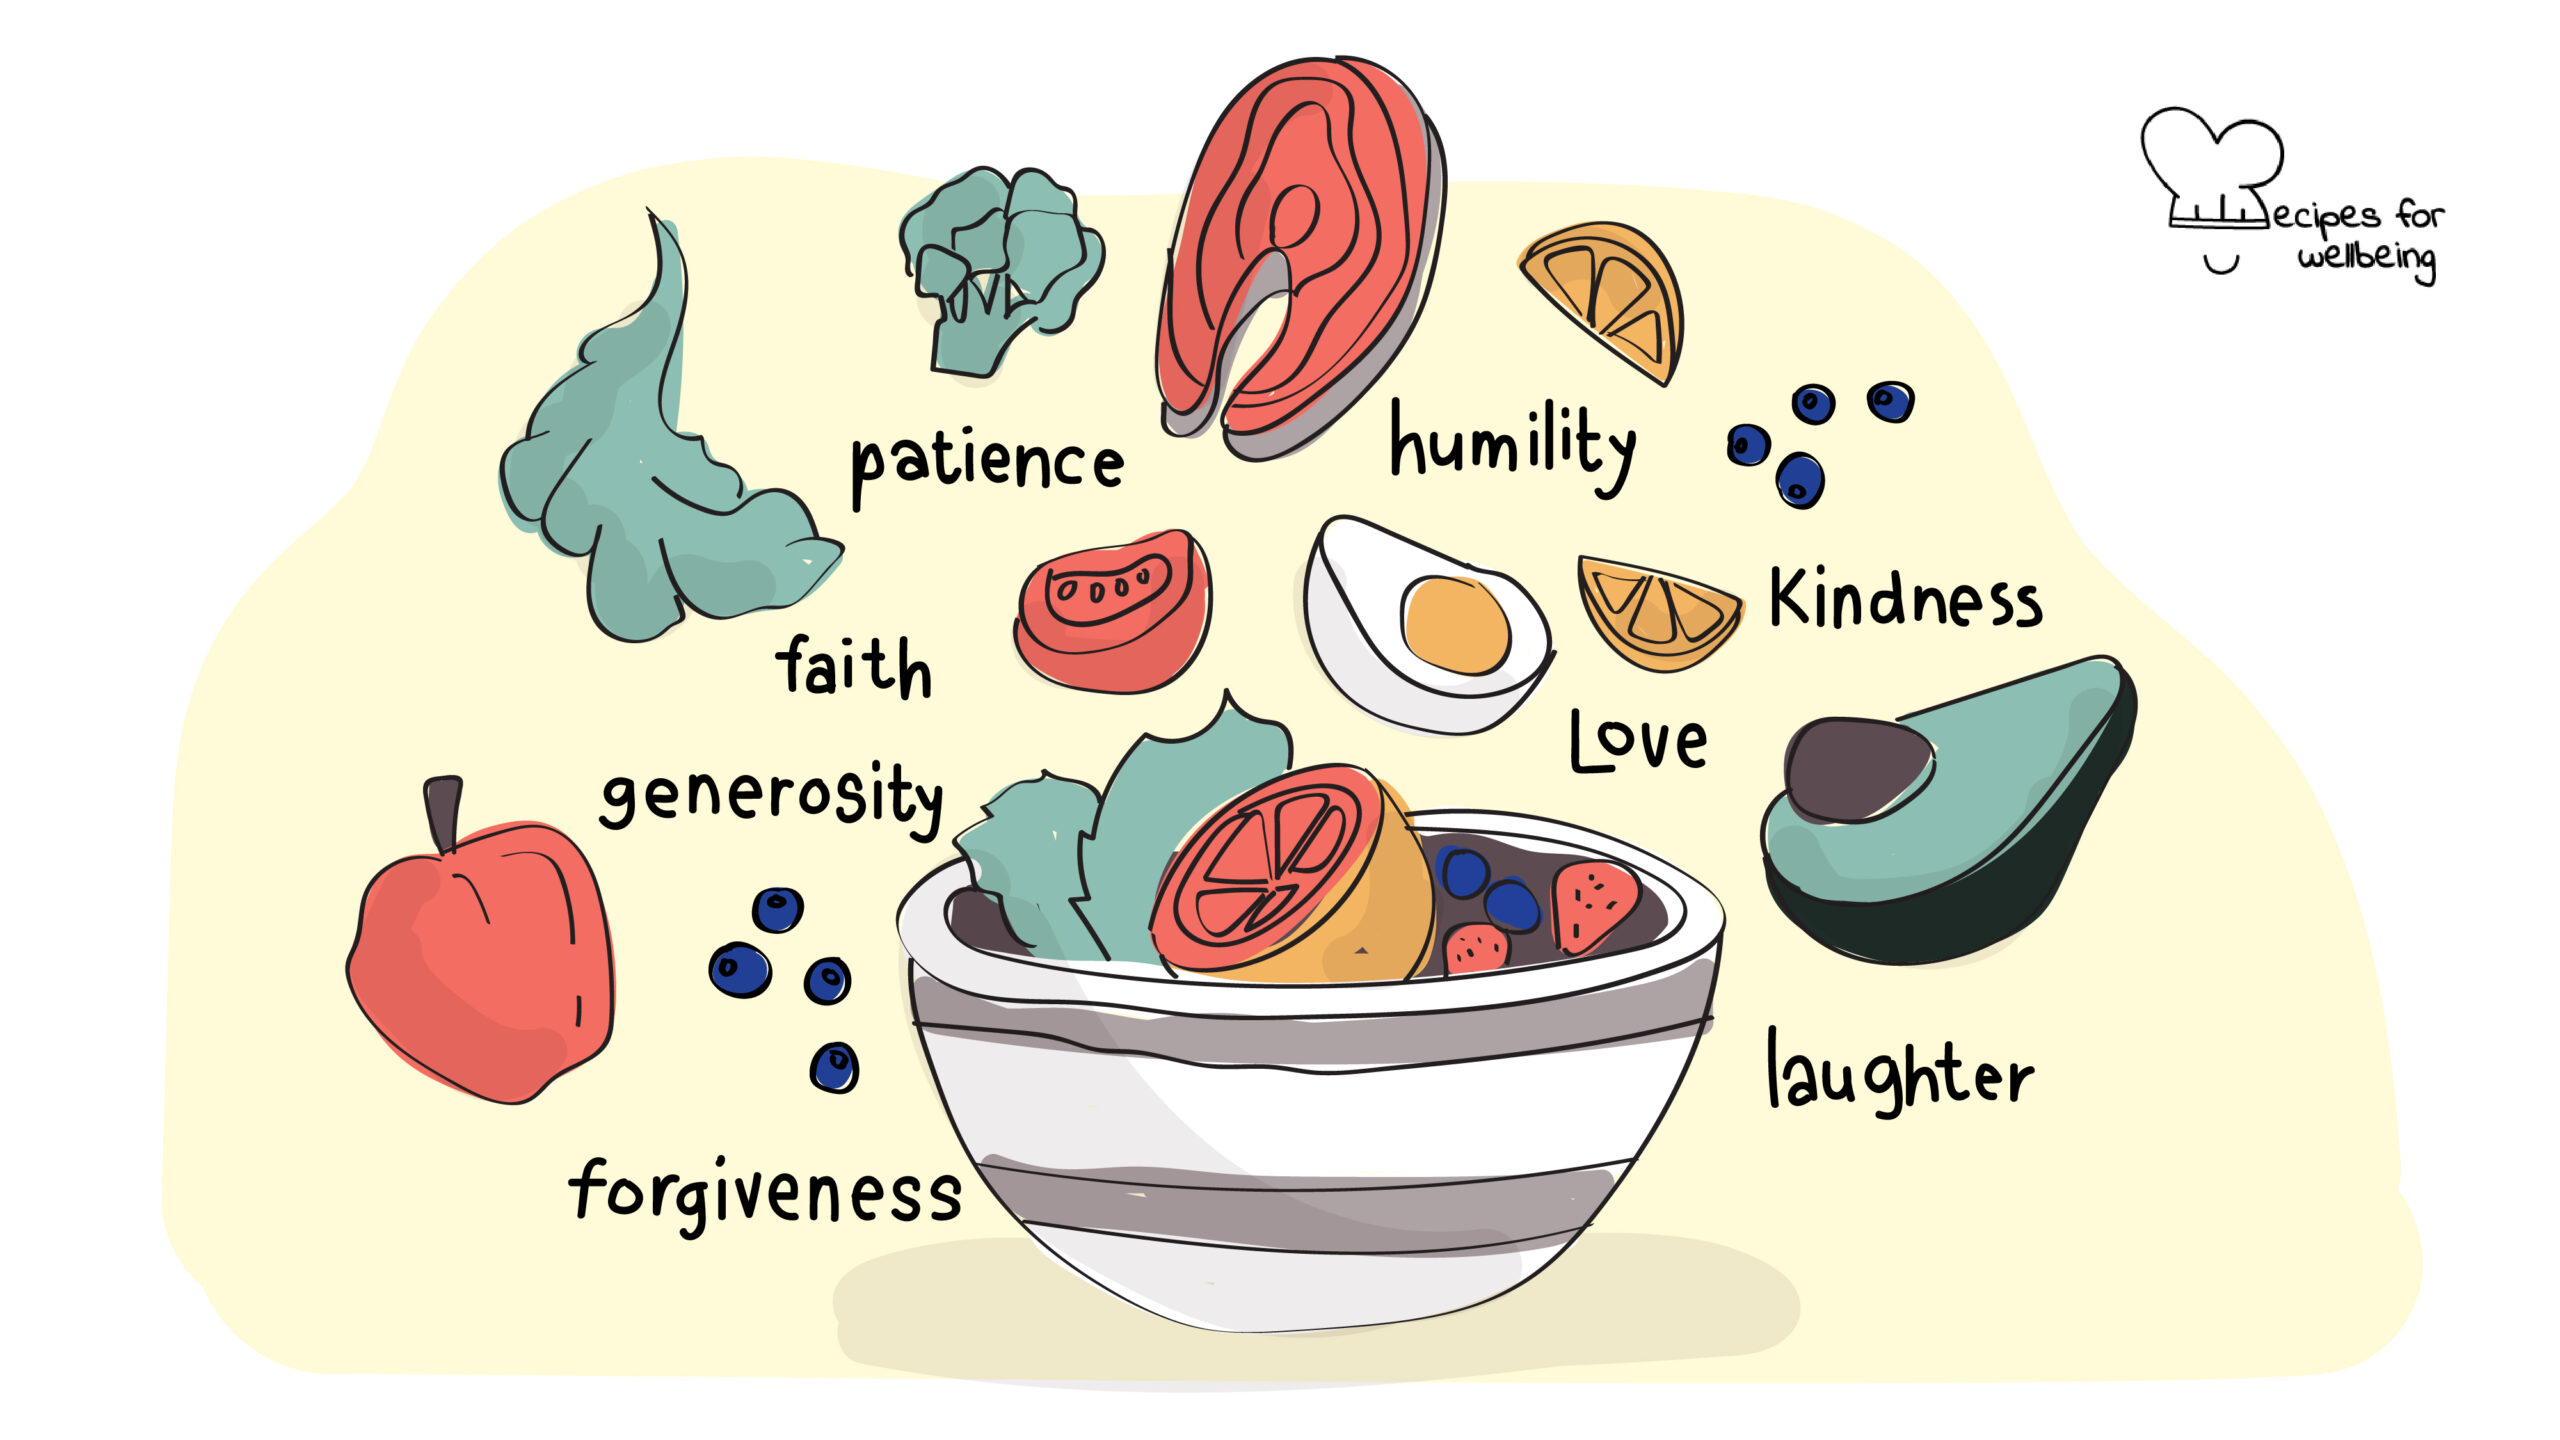 Illustration of a food bowl with different "ingredients" such as forgiveness, generosity, faith, patience, humility, love, kindness, and laughter. © Recipes for Wellbeing